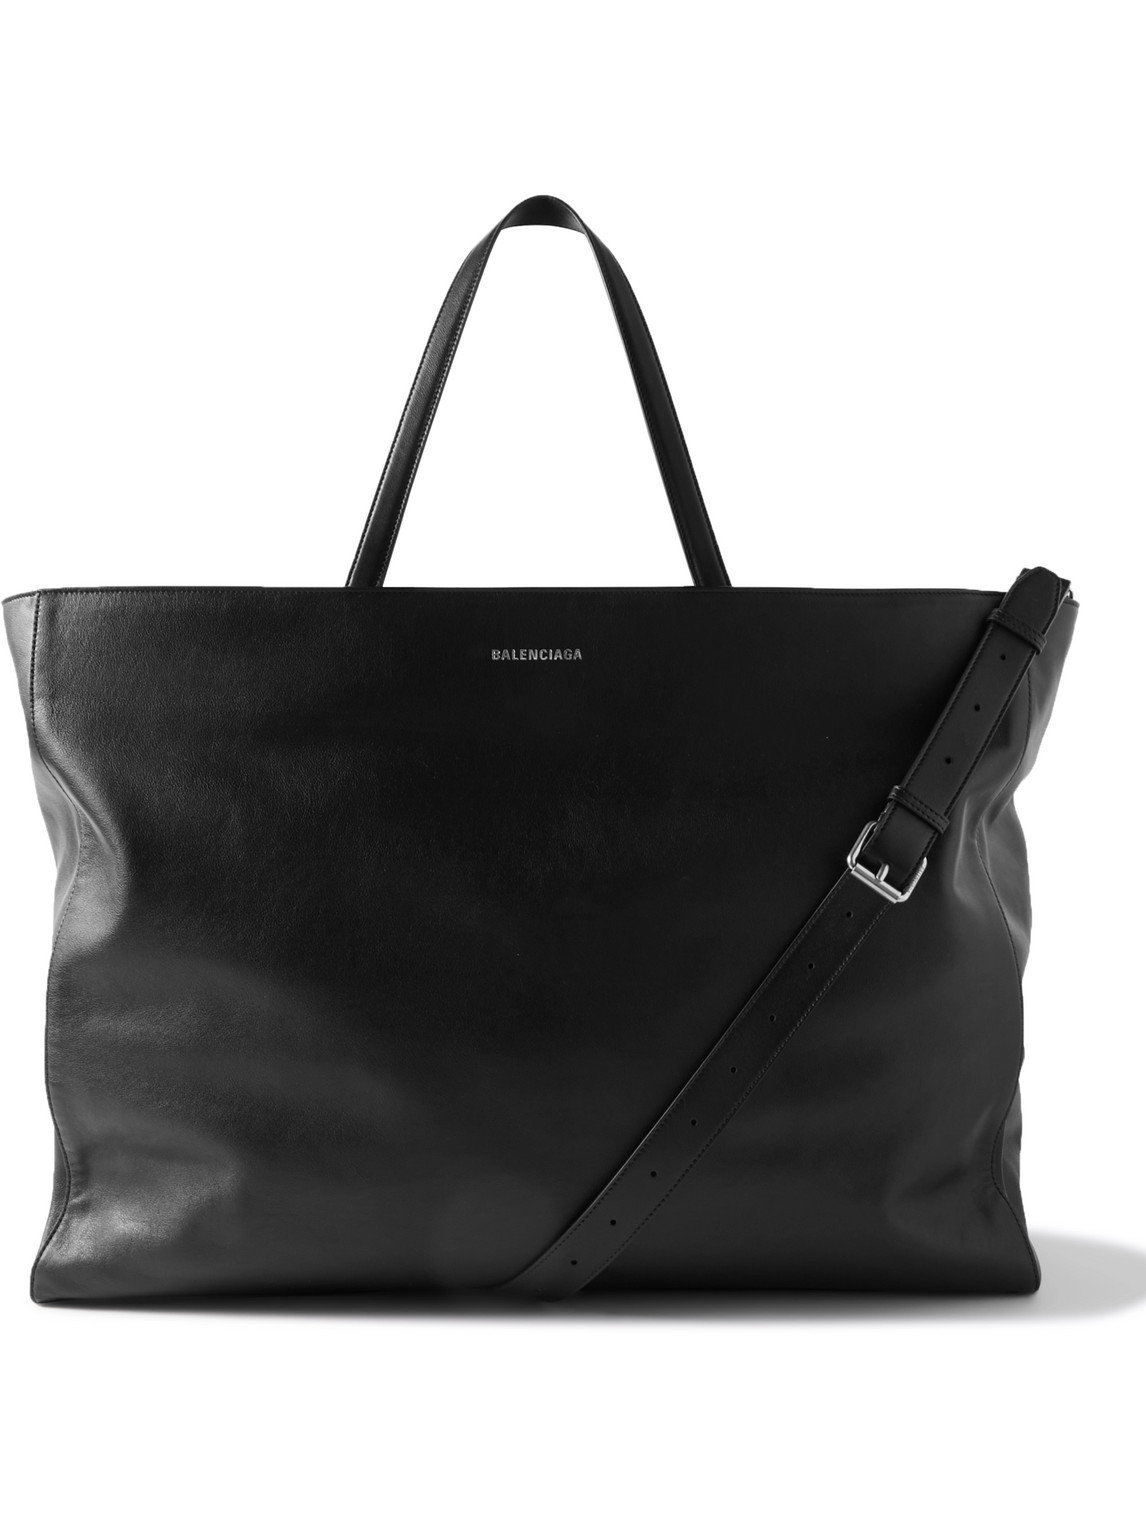 Passenger Leather Tote Bag